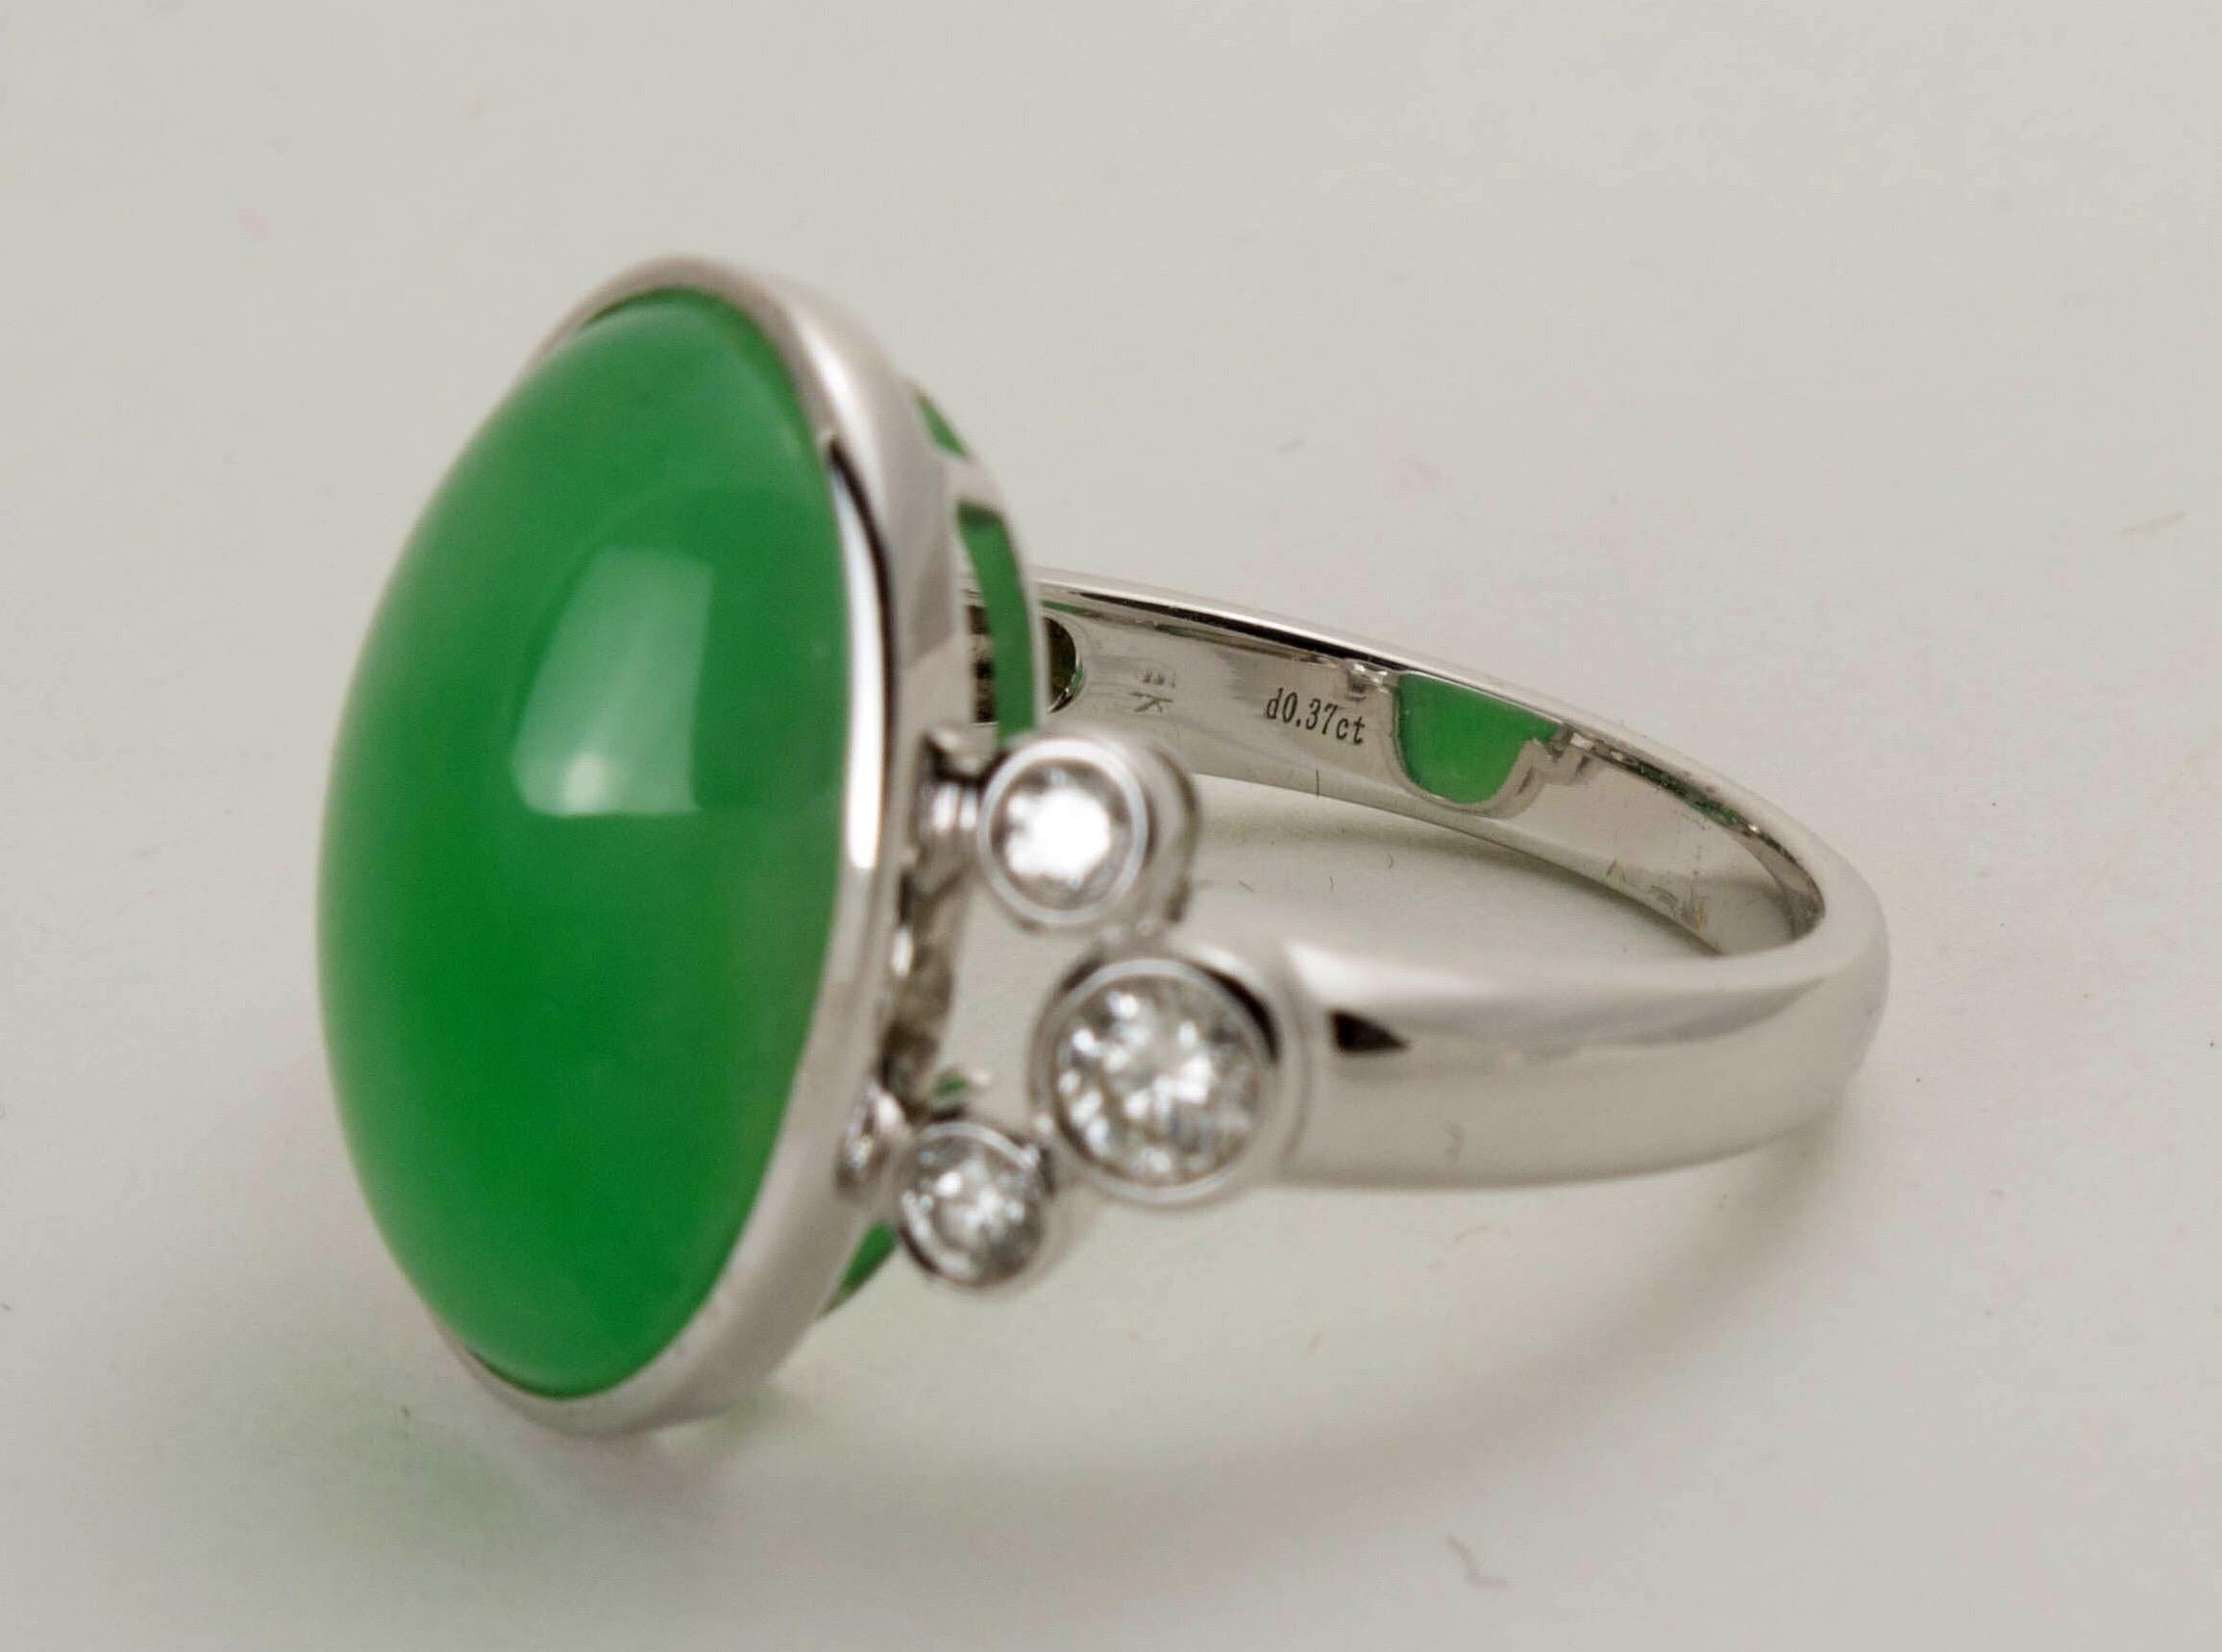 An elegant GIA certified natural green jadeite jade cabochon ring set in 18k white gold with three small round diamonds to either side. Size 7 1/4. 

The natural jadeite cabochon of an enchanting suffused green with an attractive milky translucency.